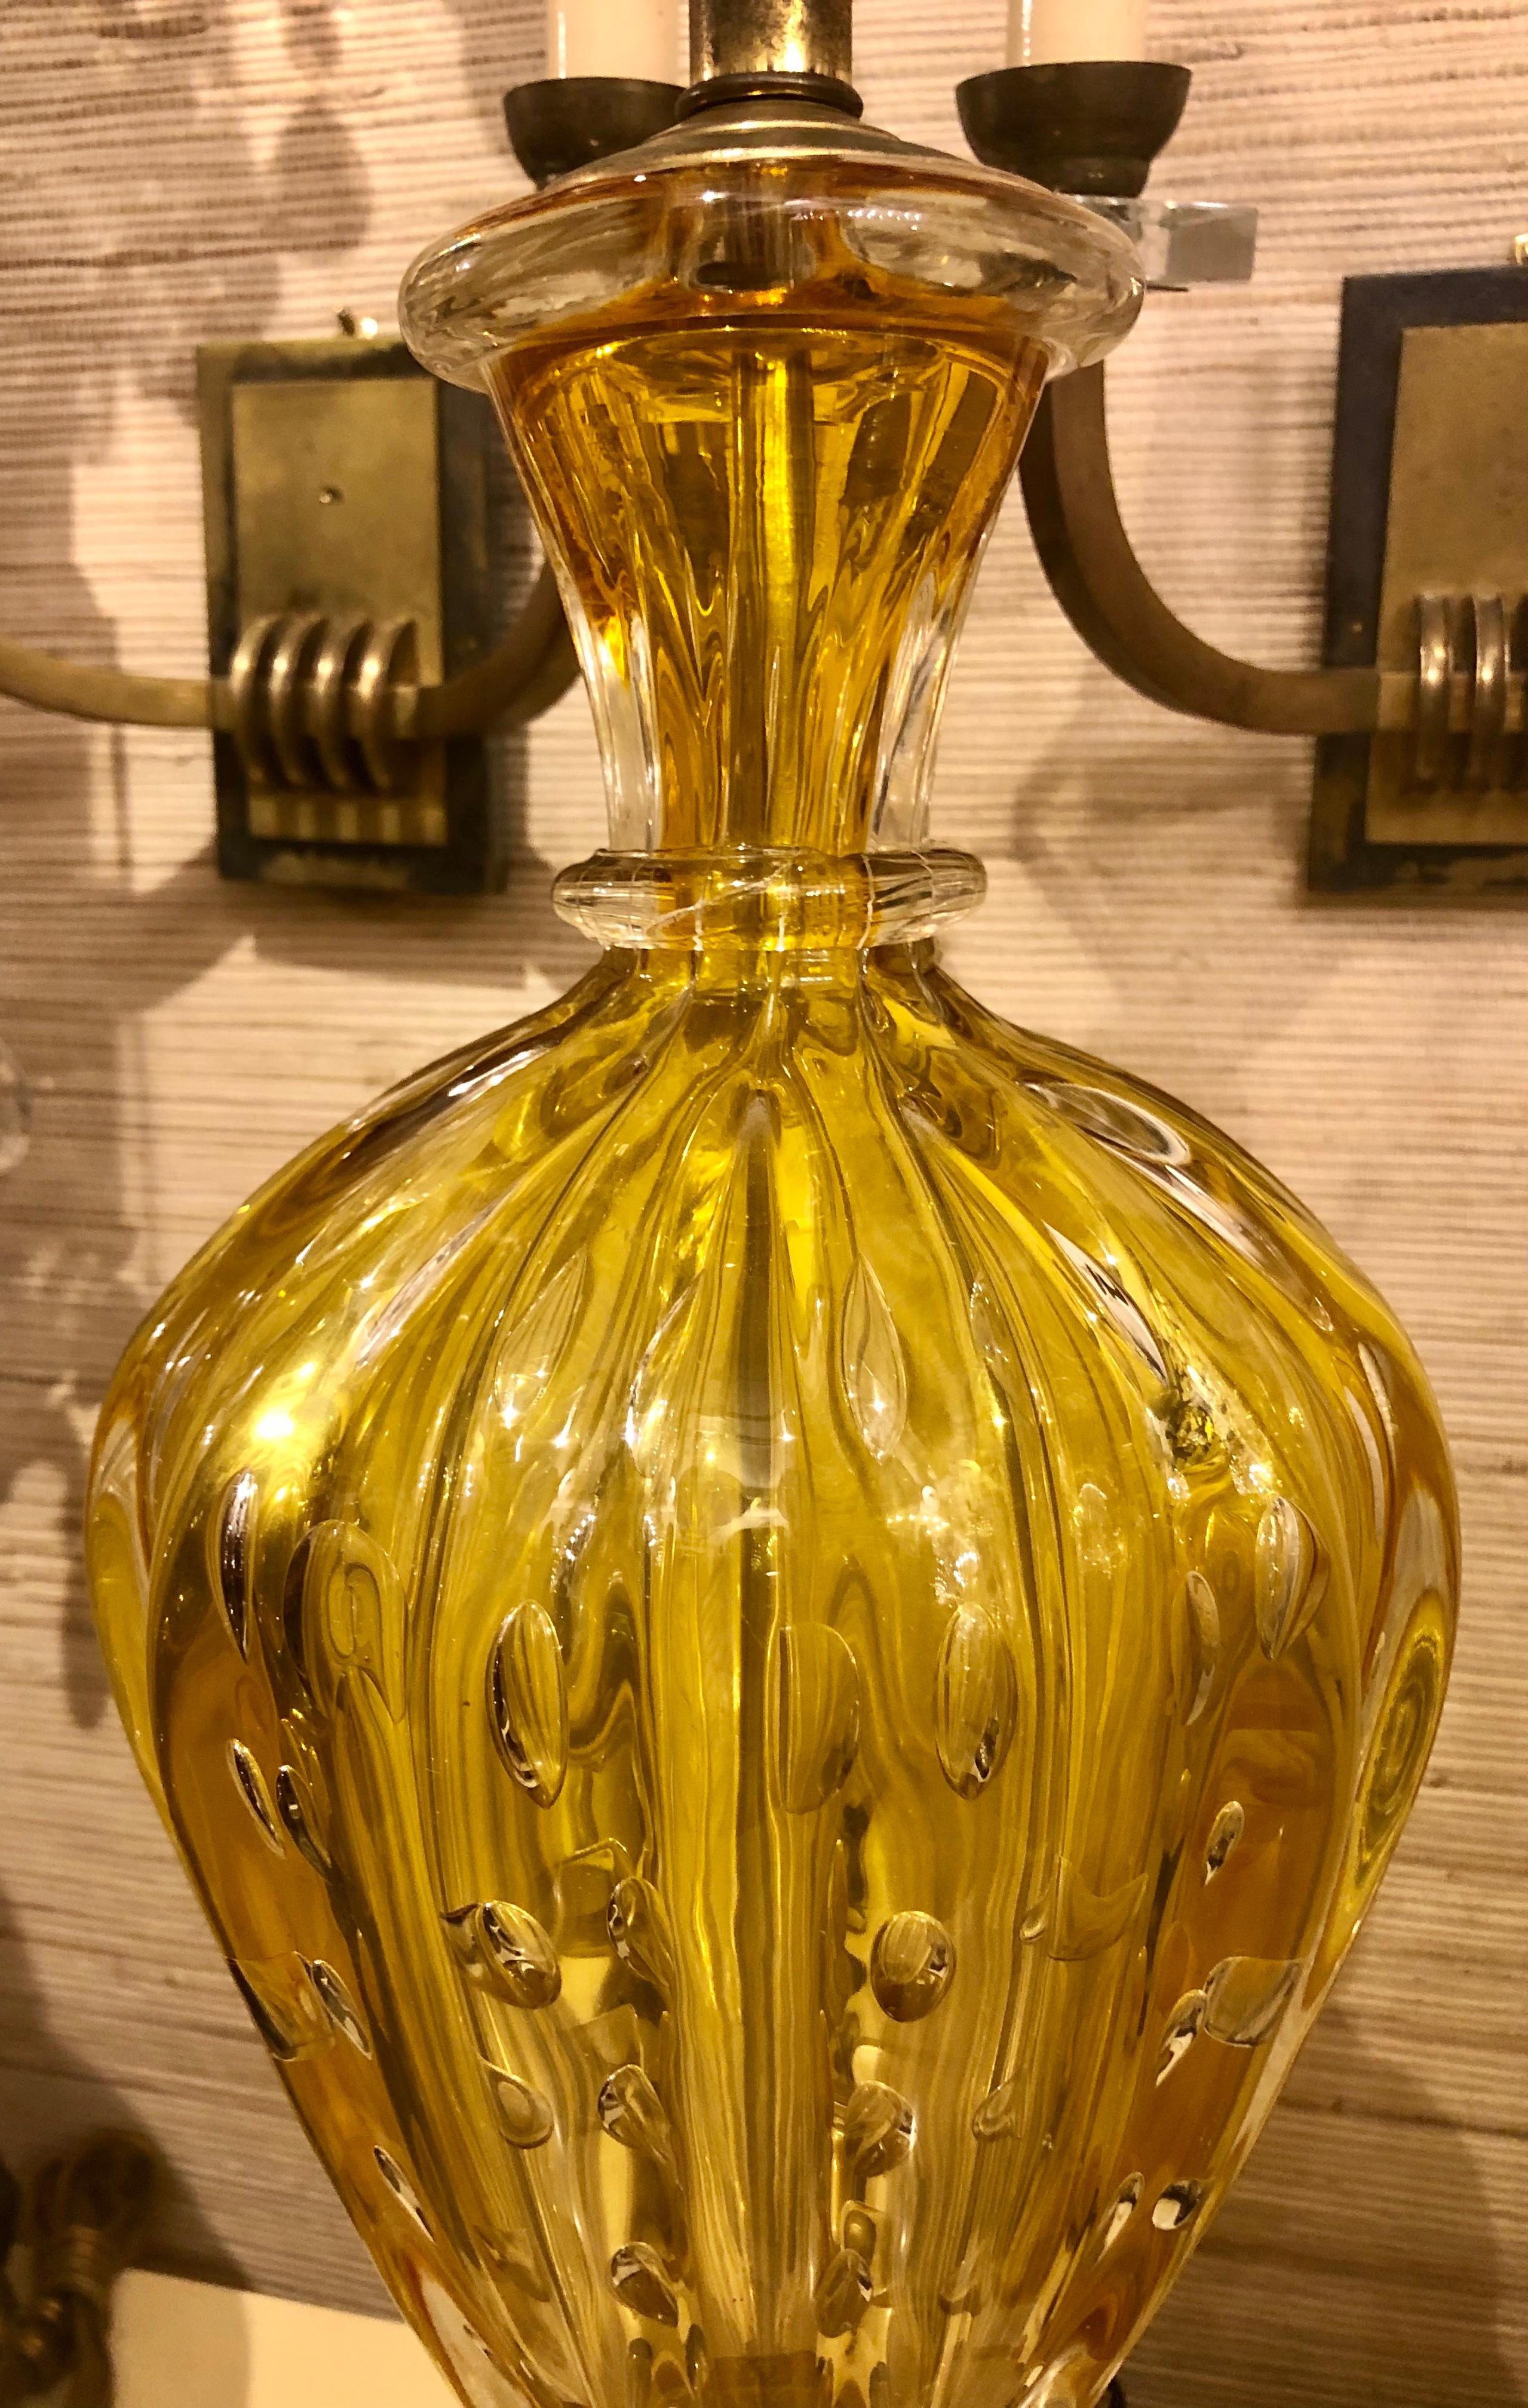 A pair of circa 1920's Italian Murano glass table lamps in yellow and gold tones, with controlled bubbles in body.

Measurements
Height of body: 19